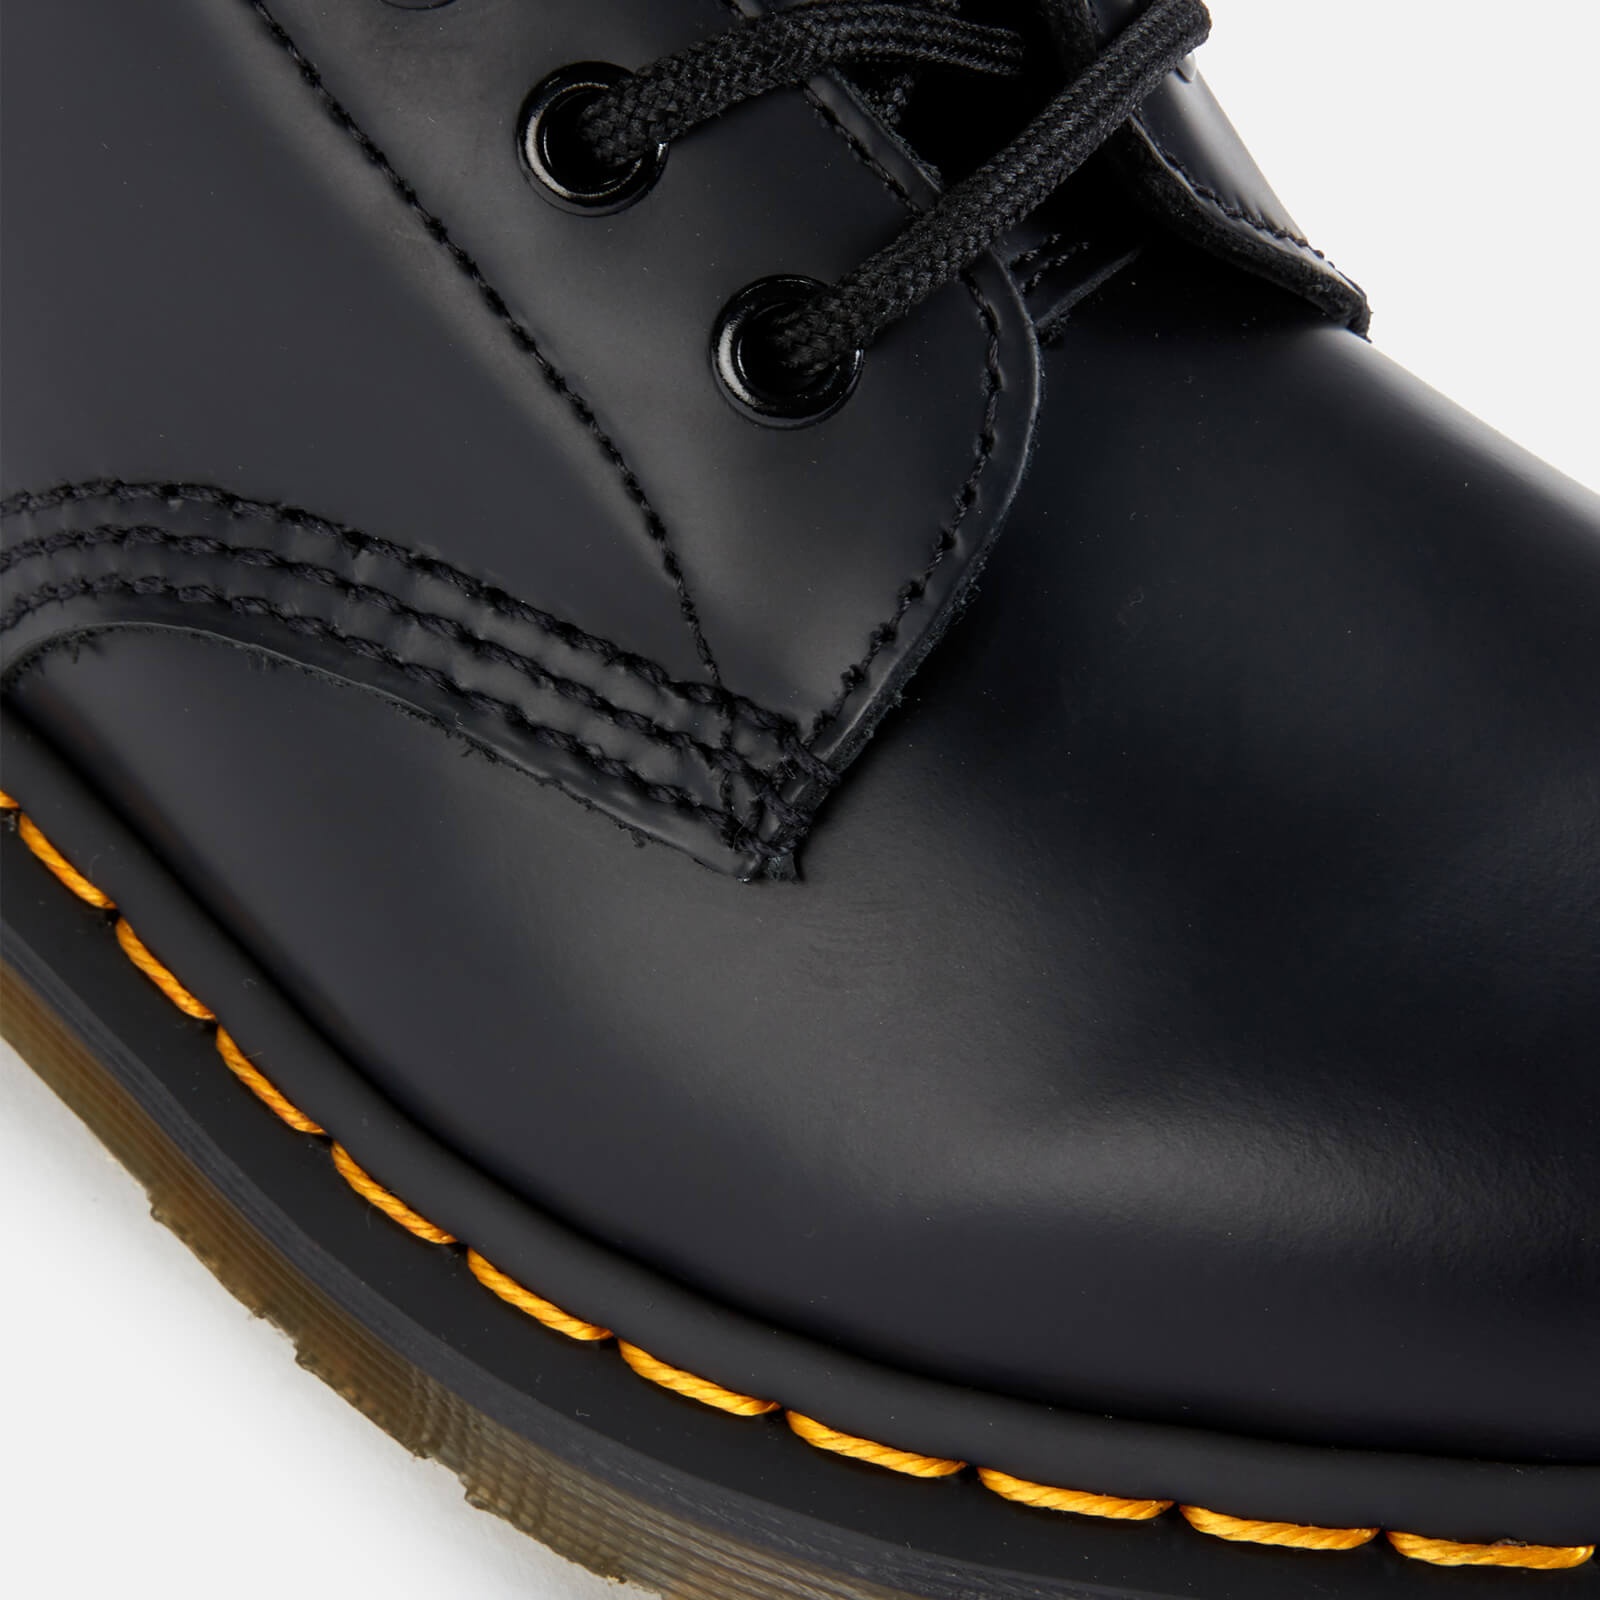 Dr. Martens 1460 Smooth Leather 8-Eye Boots - Black - 4